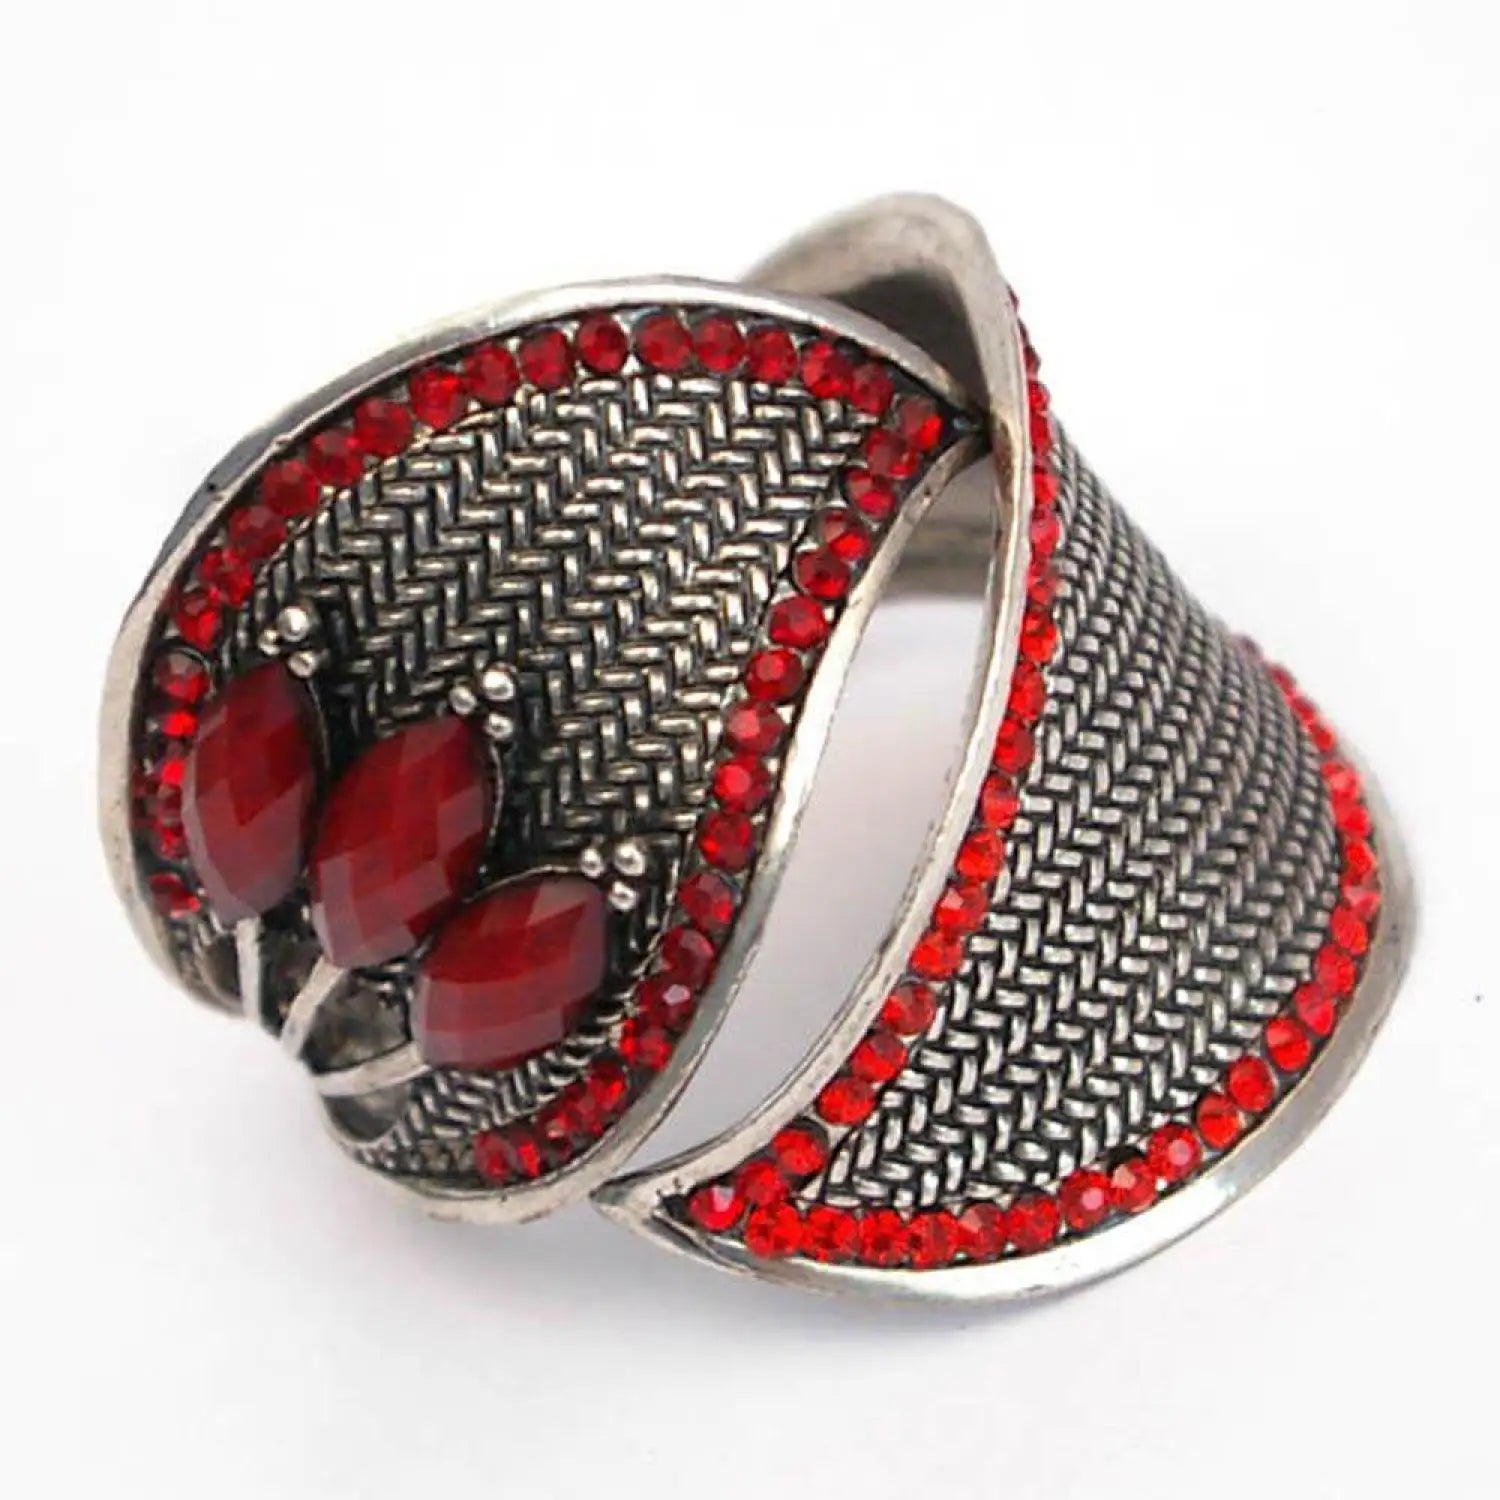 Silver bangle bracelet with red stone statement beads